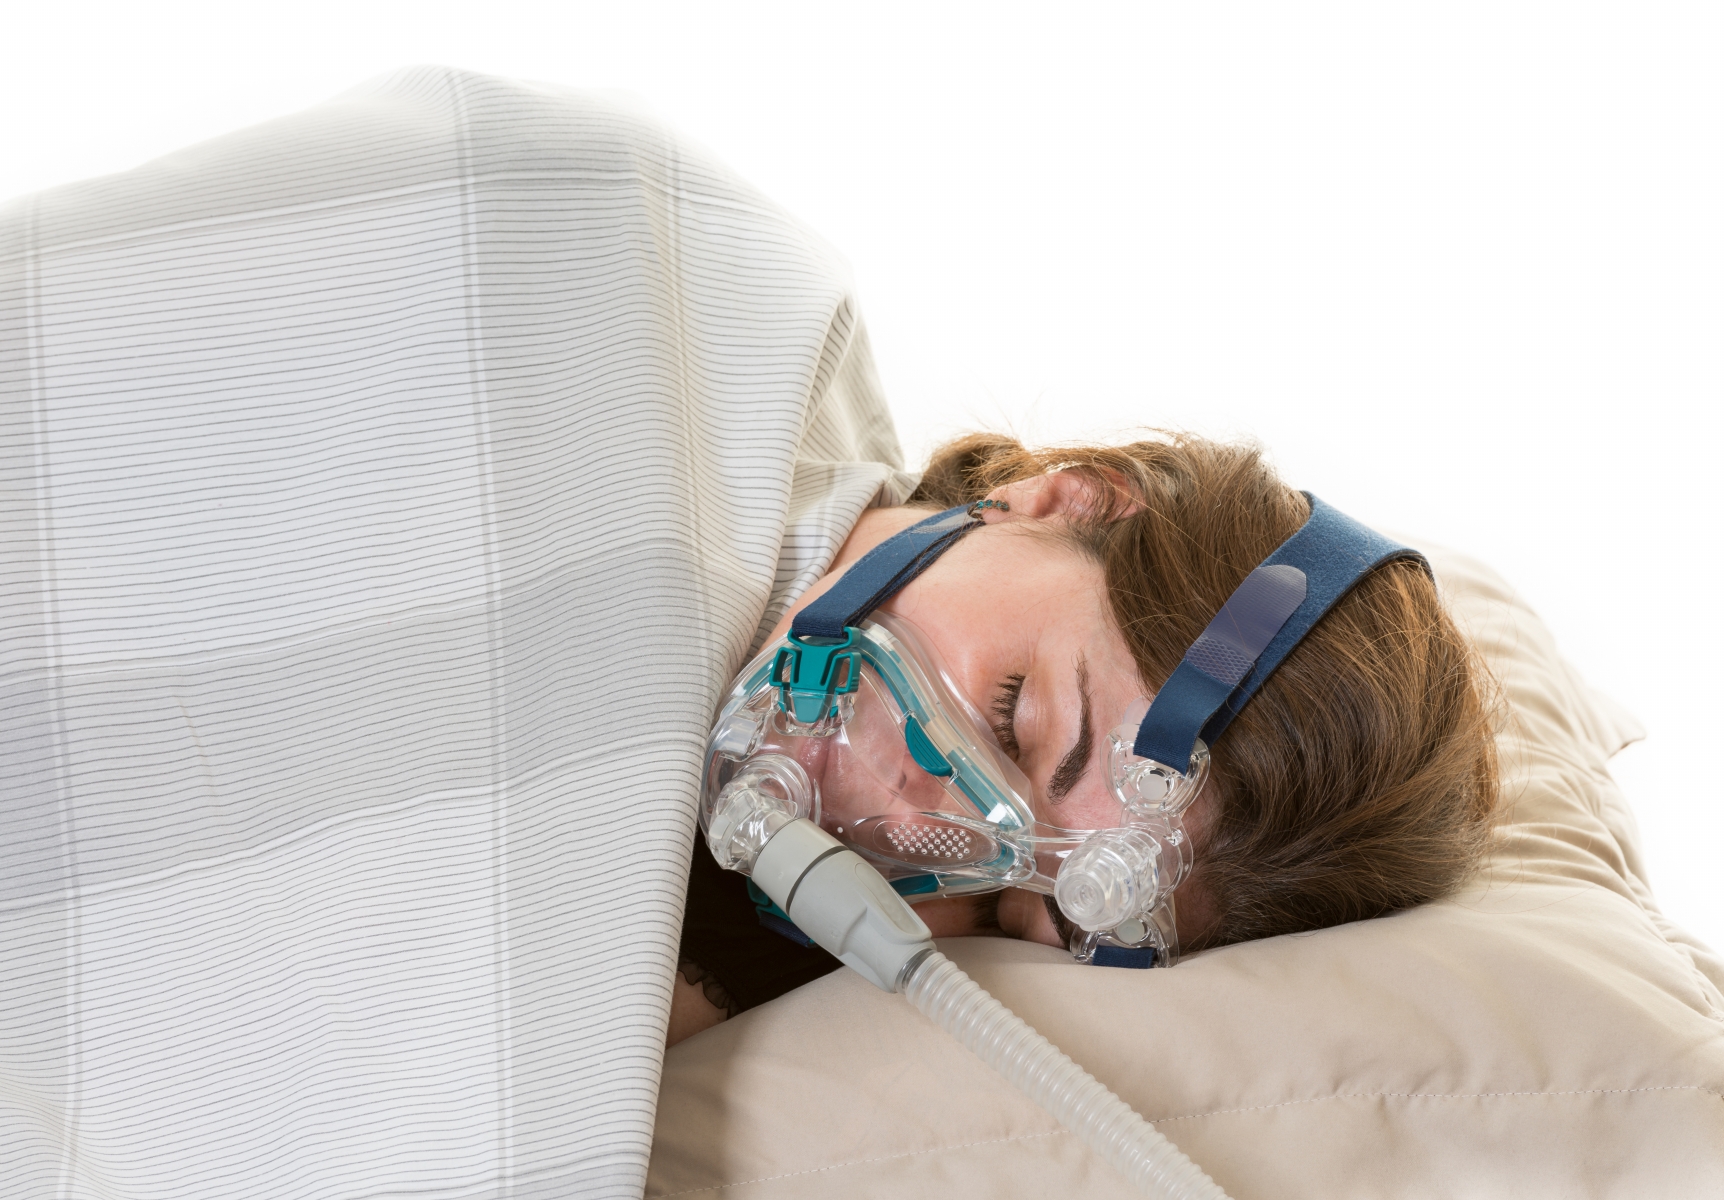 Make patients feel at ease with the Nasal Comforter